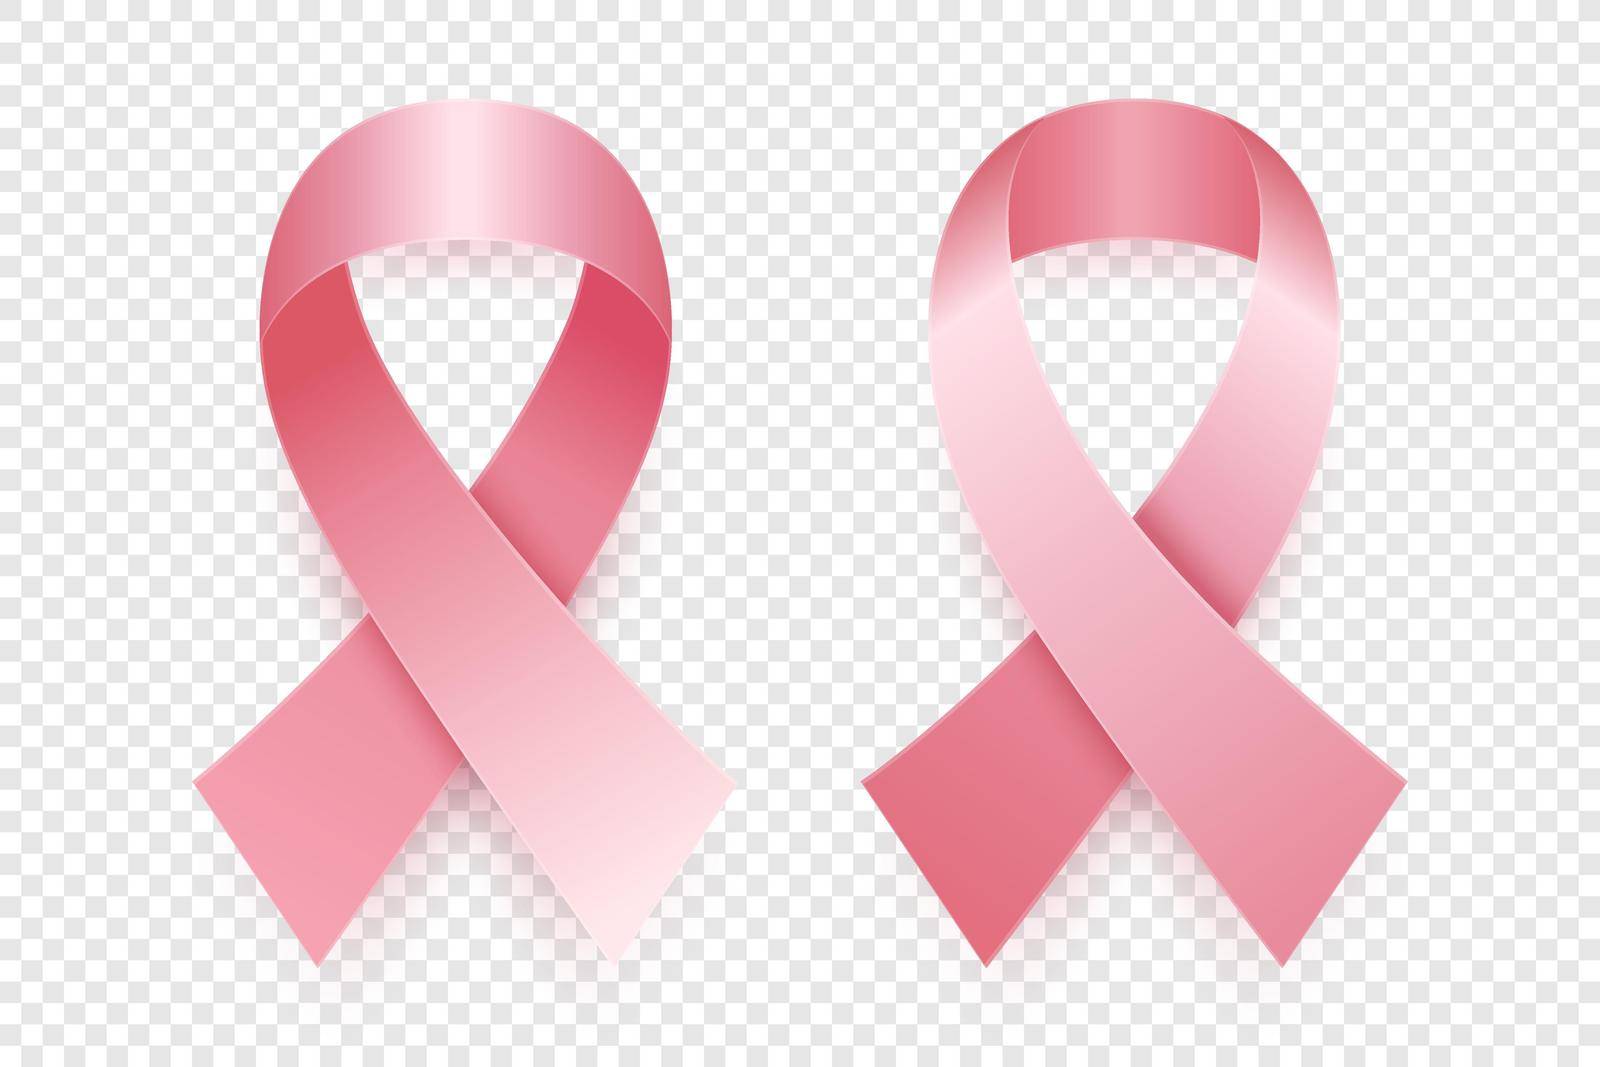 Vector 3d Realistic Pink Ribbon Set. Breast Cancer Awareness Symbol Closeup. Cancer Ribbon Template. World Breast Cancer Day Concept by Gomolach